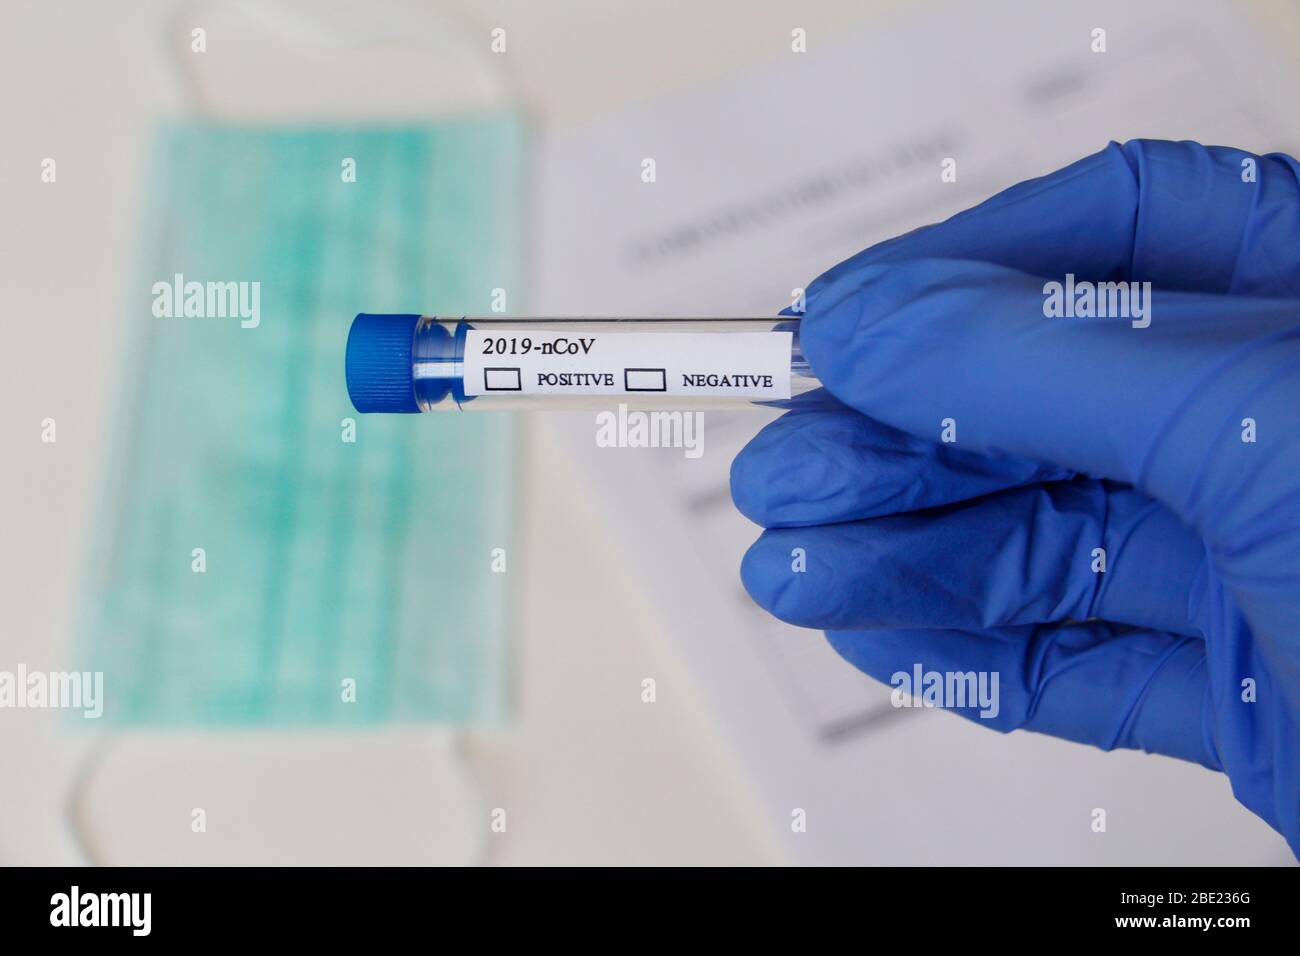 Laboratory test for determination of Coronavirus. Concept. The doctor holds a test tube for analysis. The test tube says POSITIVE and NEGATIVE. On the Stock Photo